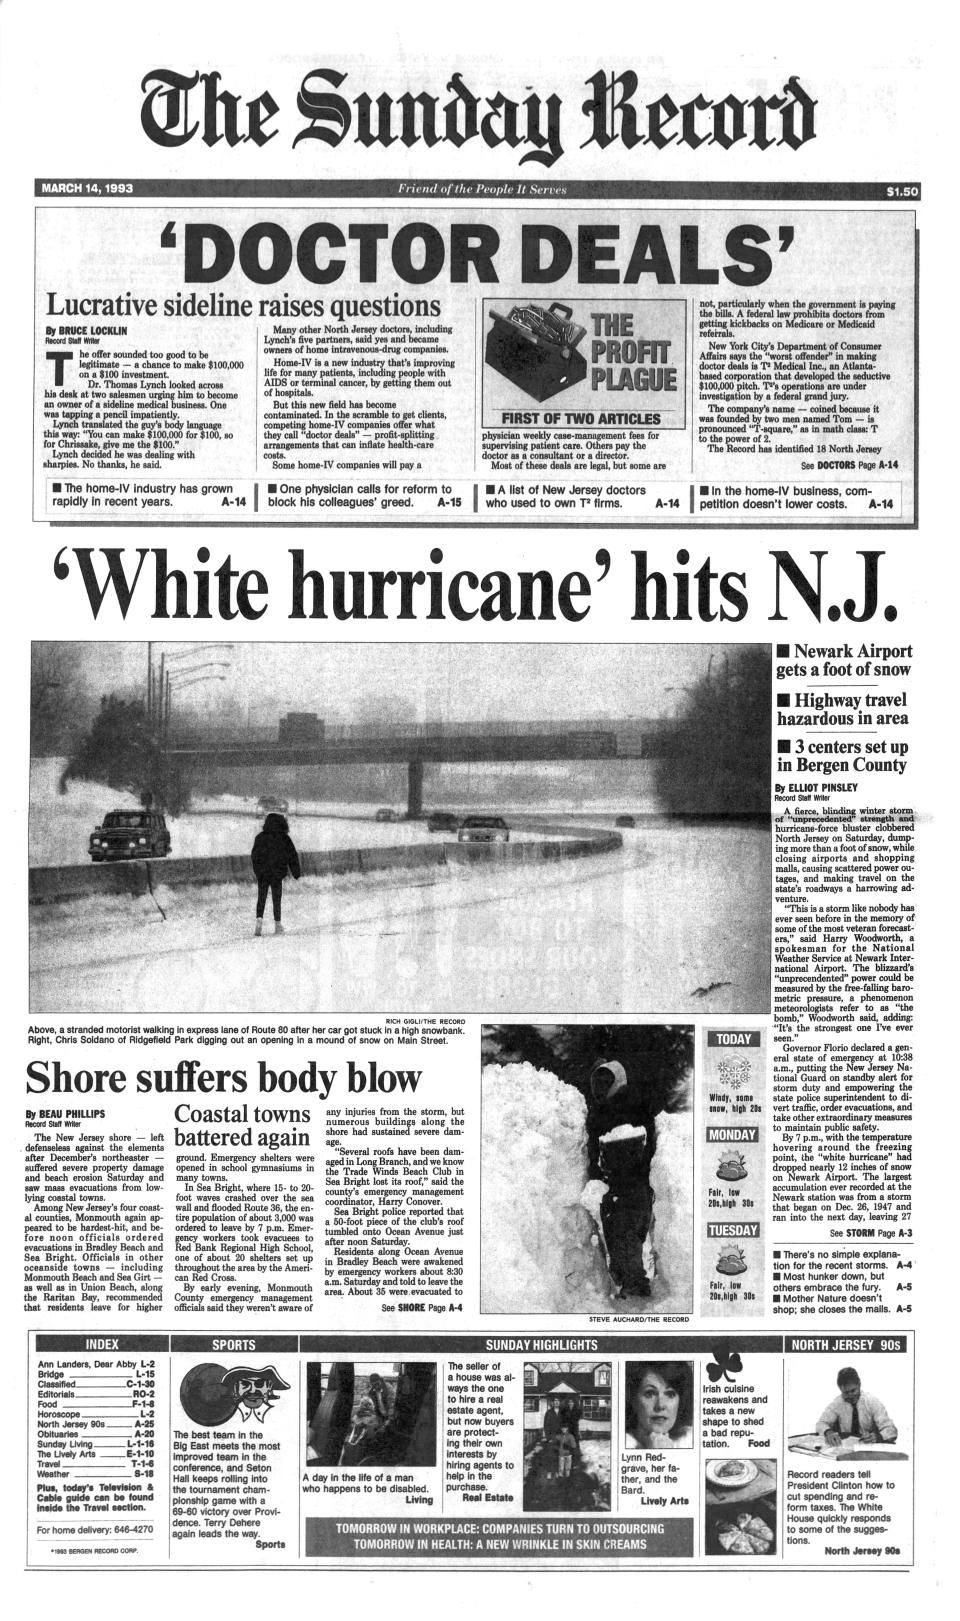 The snowstorm of March 1993, dubbed the storm of the century, turns 30.